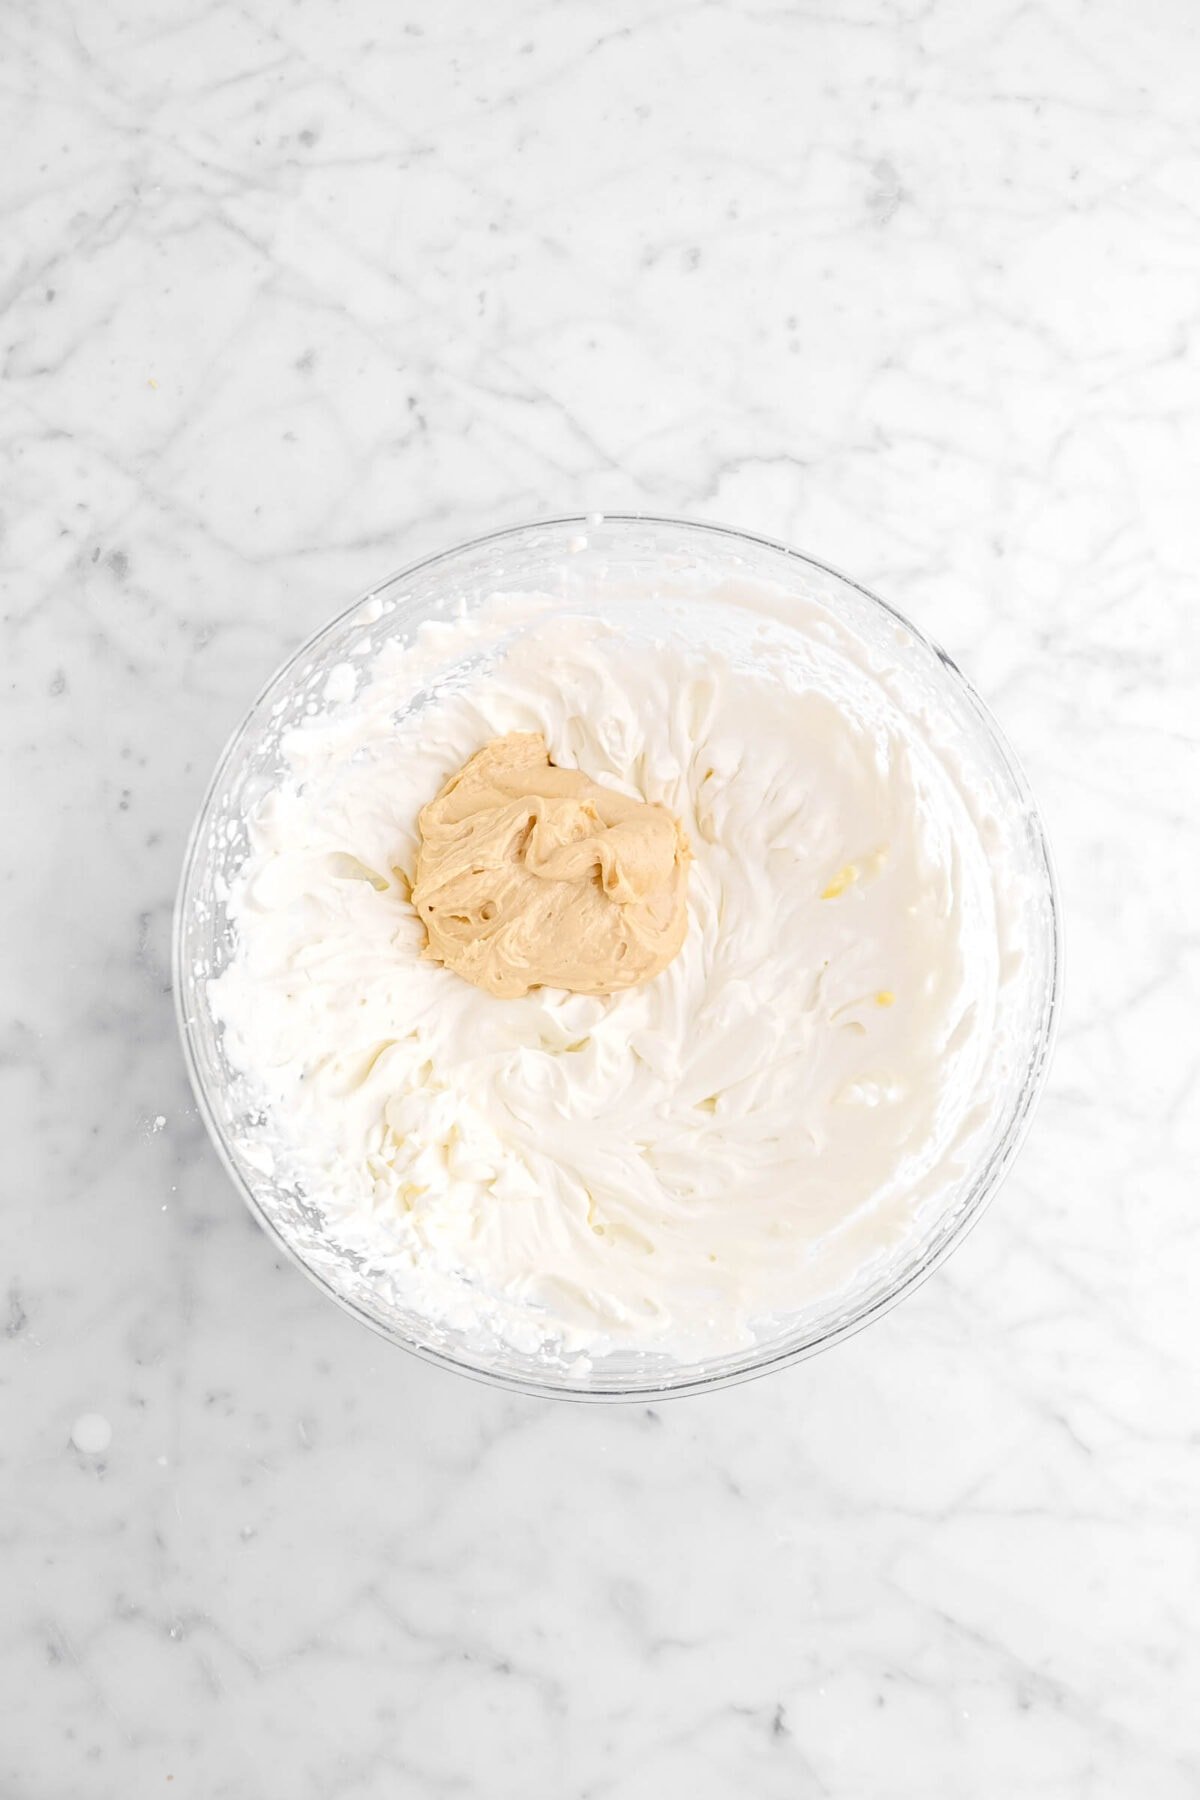 scoop of peanut butter mixture added to chantilly cream